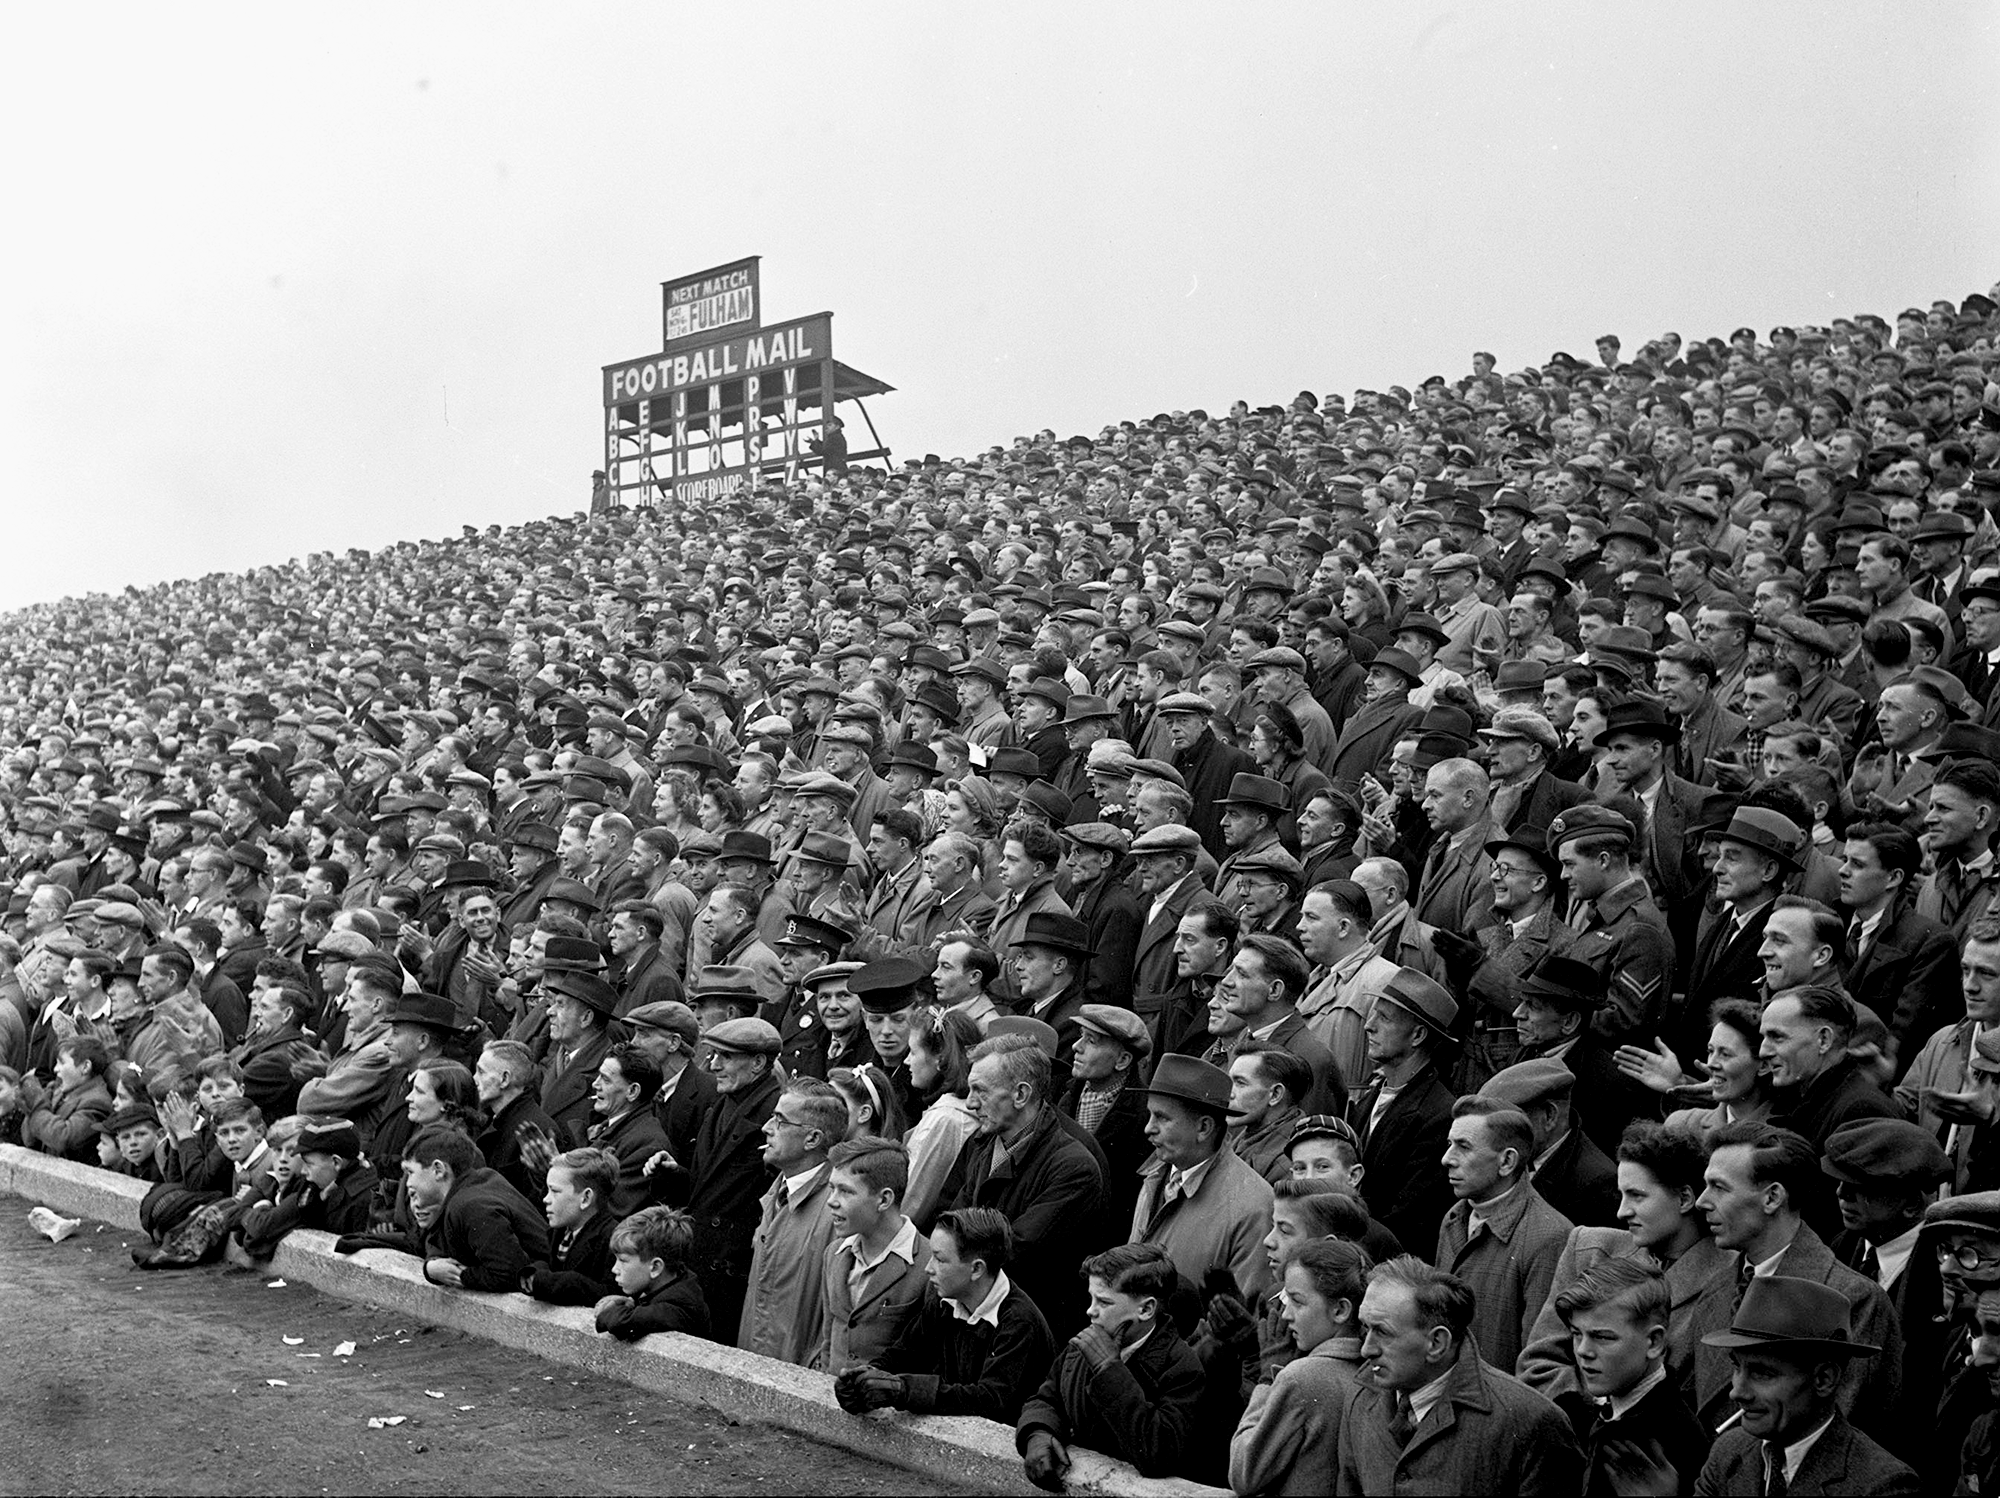 football, 31st october 1948, fratton park, portsmouth, england, crowds pack onto the terraces to watch portsmouth fc  photo by popperfoto via getty imagesgetty images